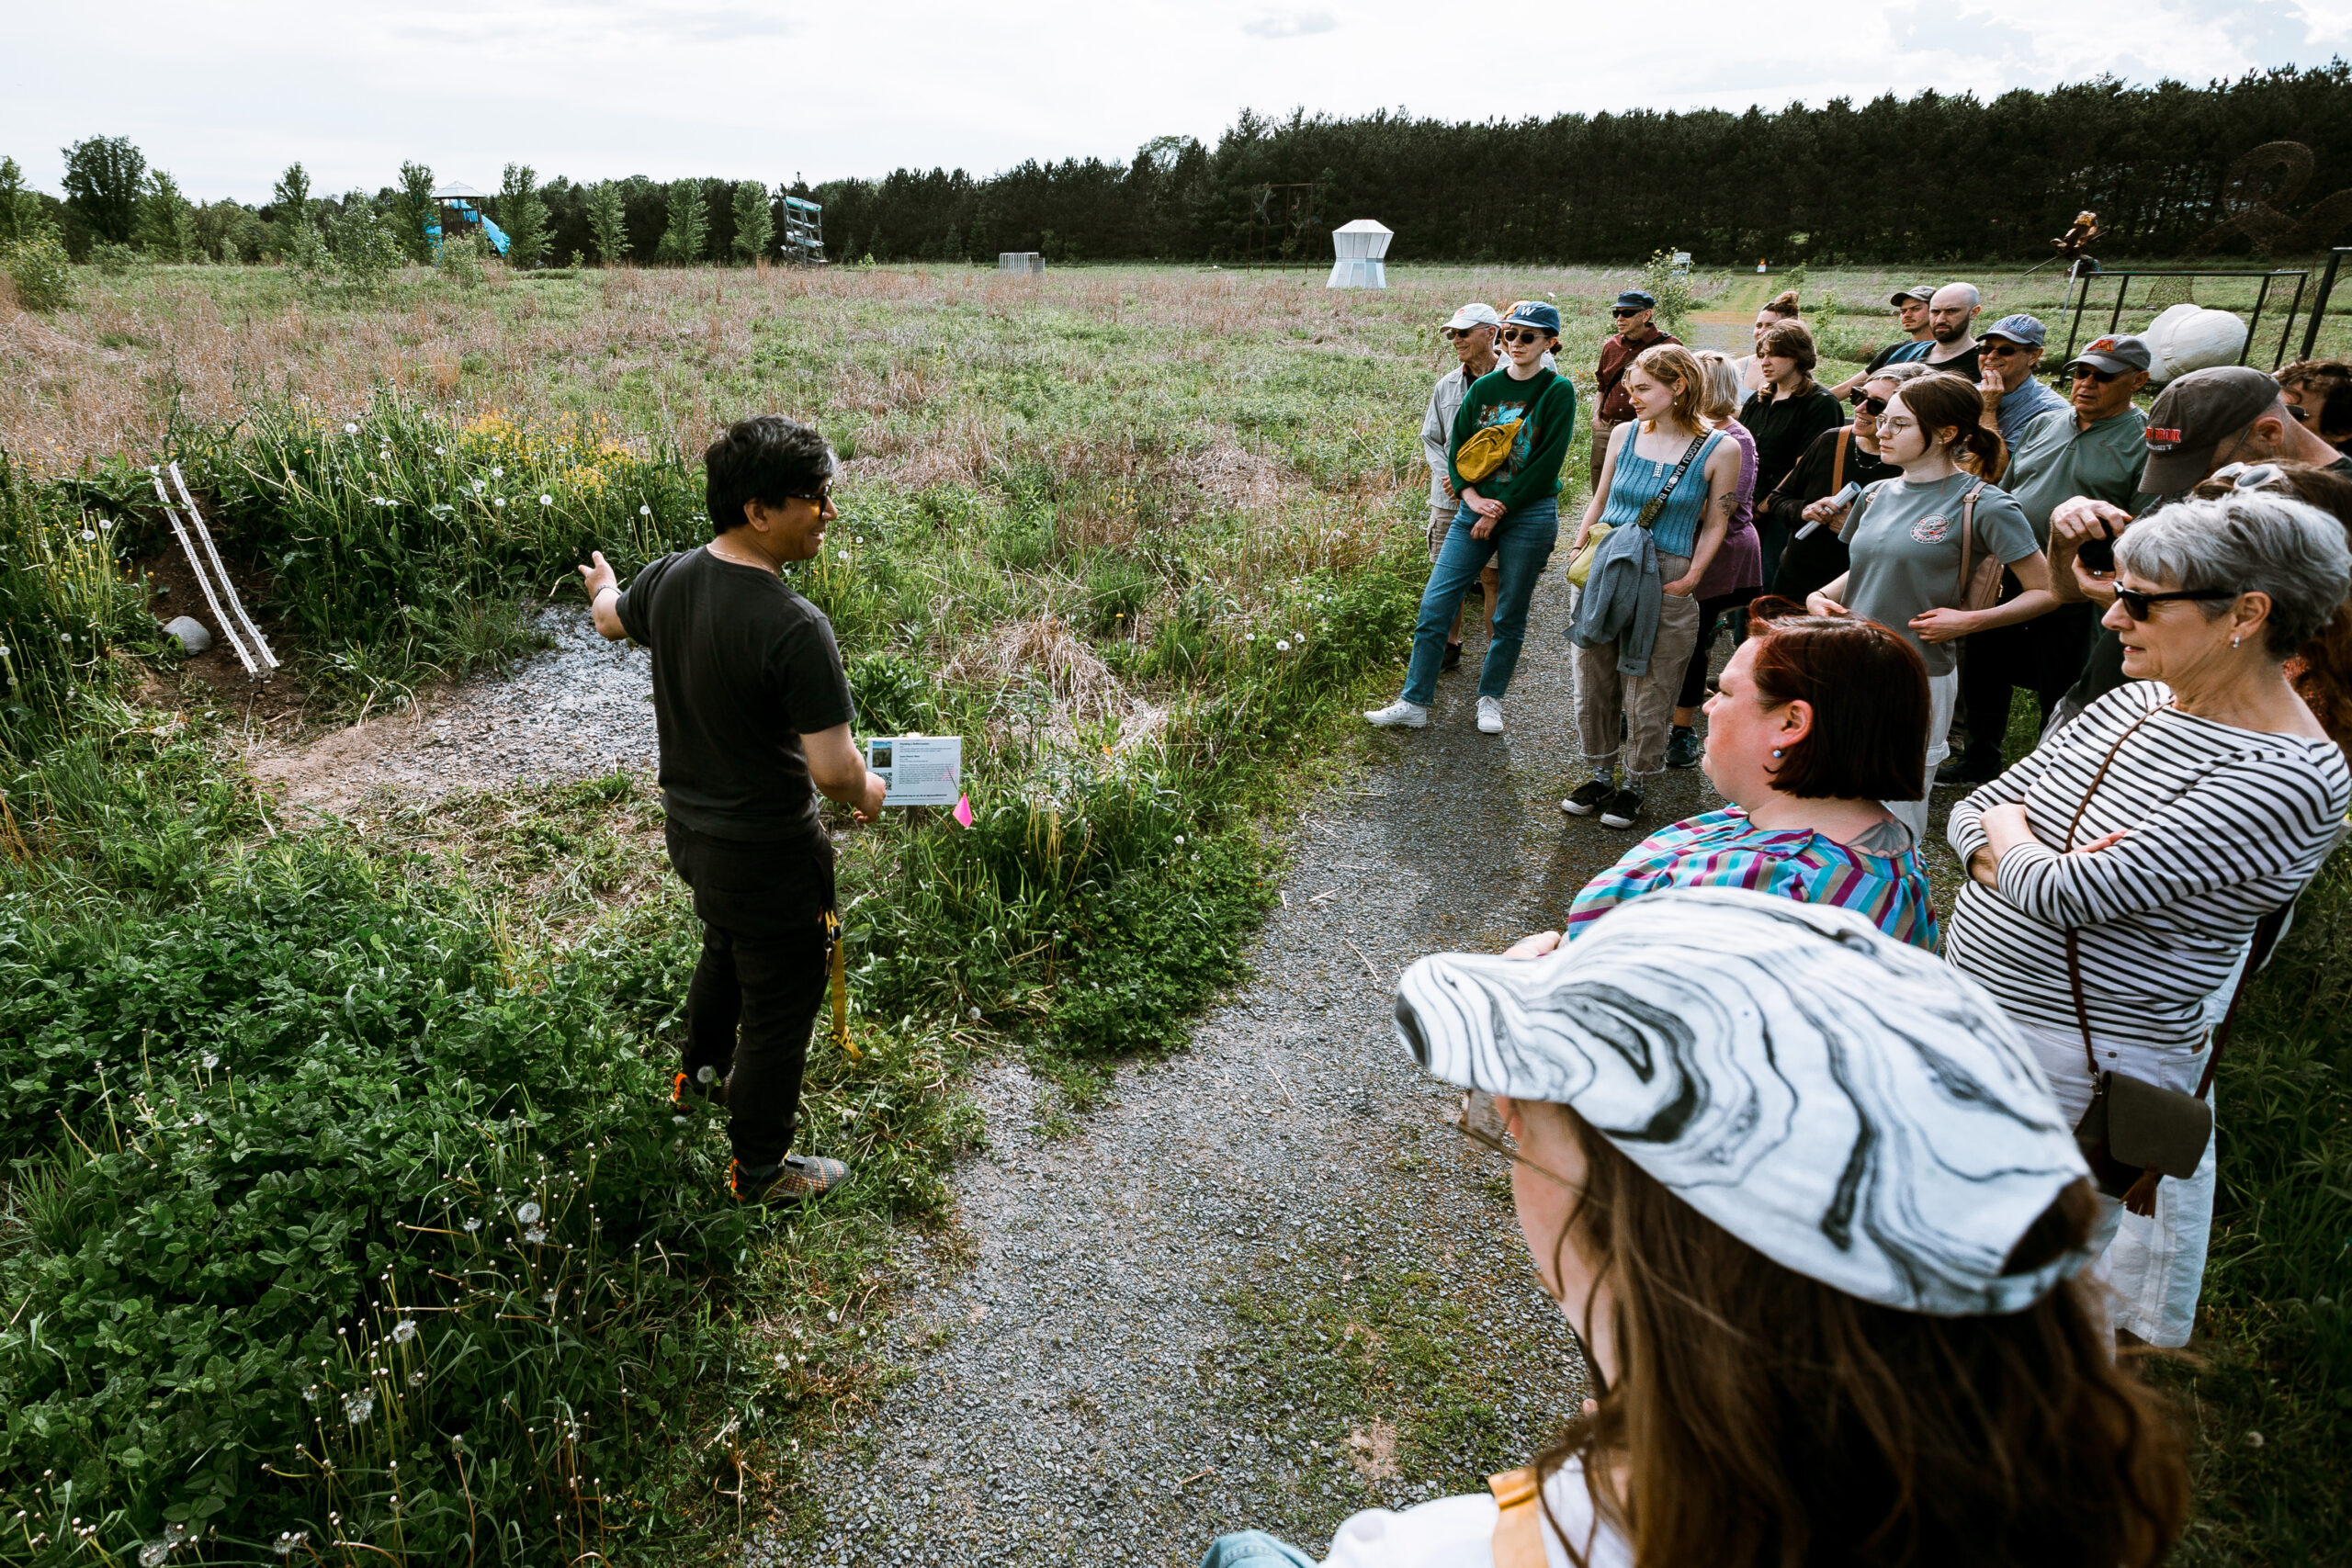 A person stands in front of a group of people outside, speaking and gesturing to an open area in the tall grass behind them.